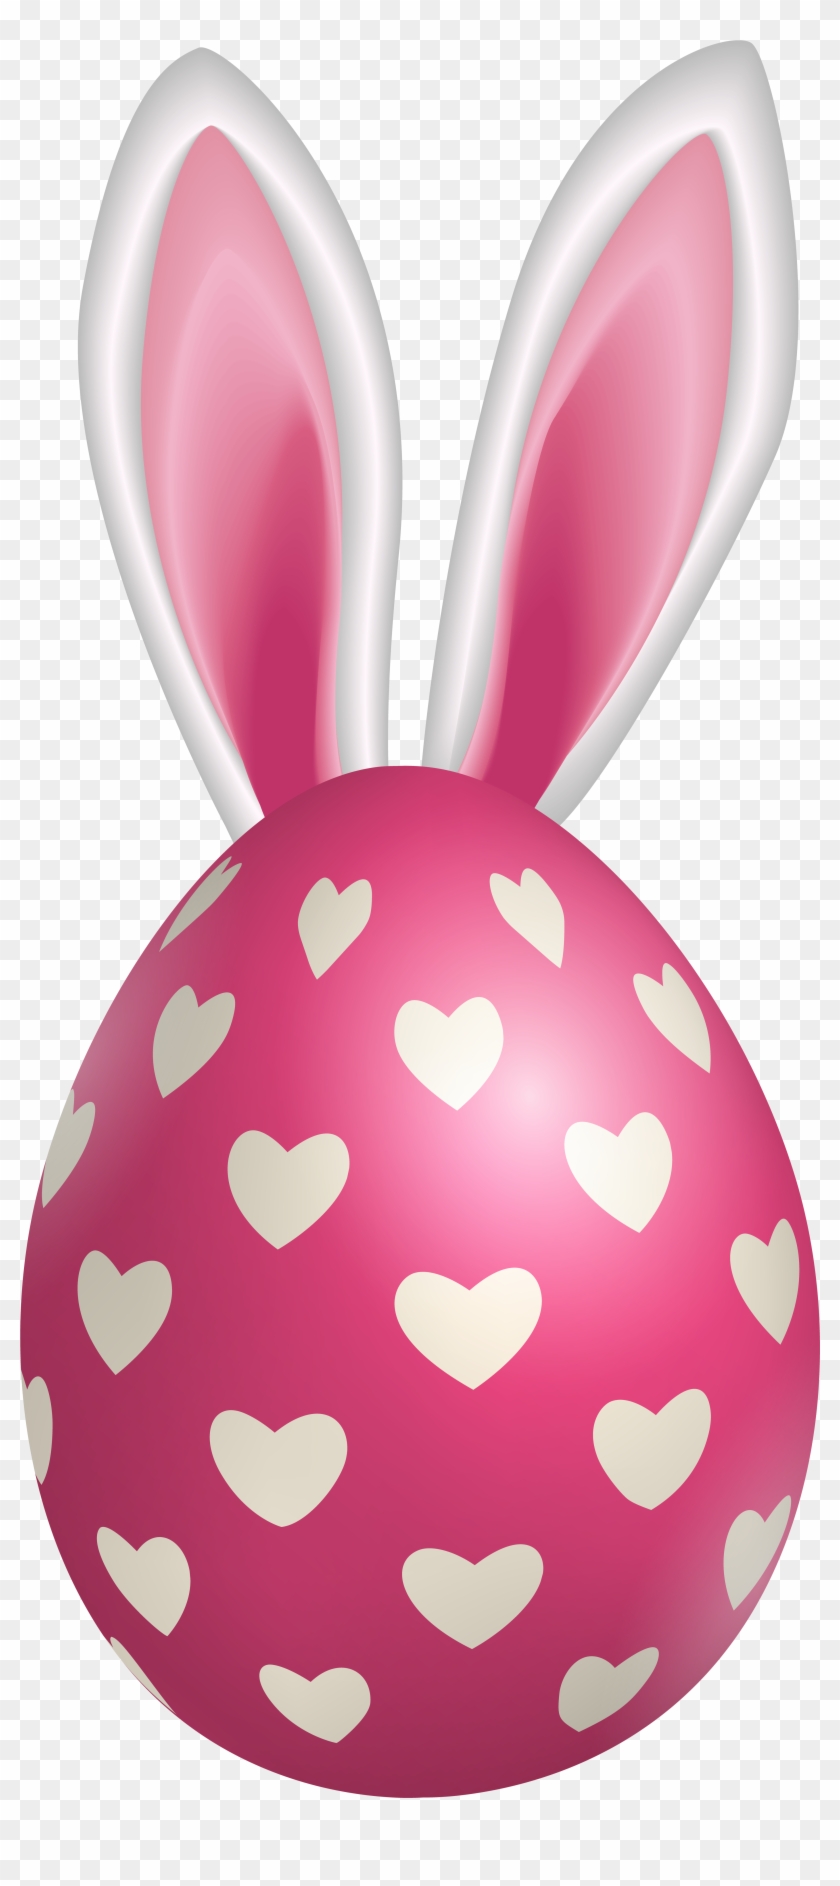 Easter Egg With Hearts And Ears Png Clipart - Domestic Rabbit Transparent Png #2650854